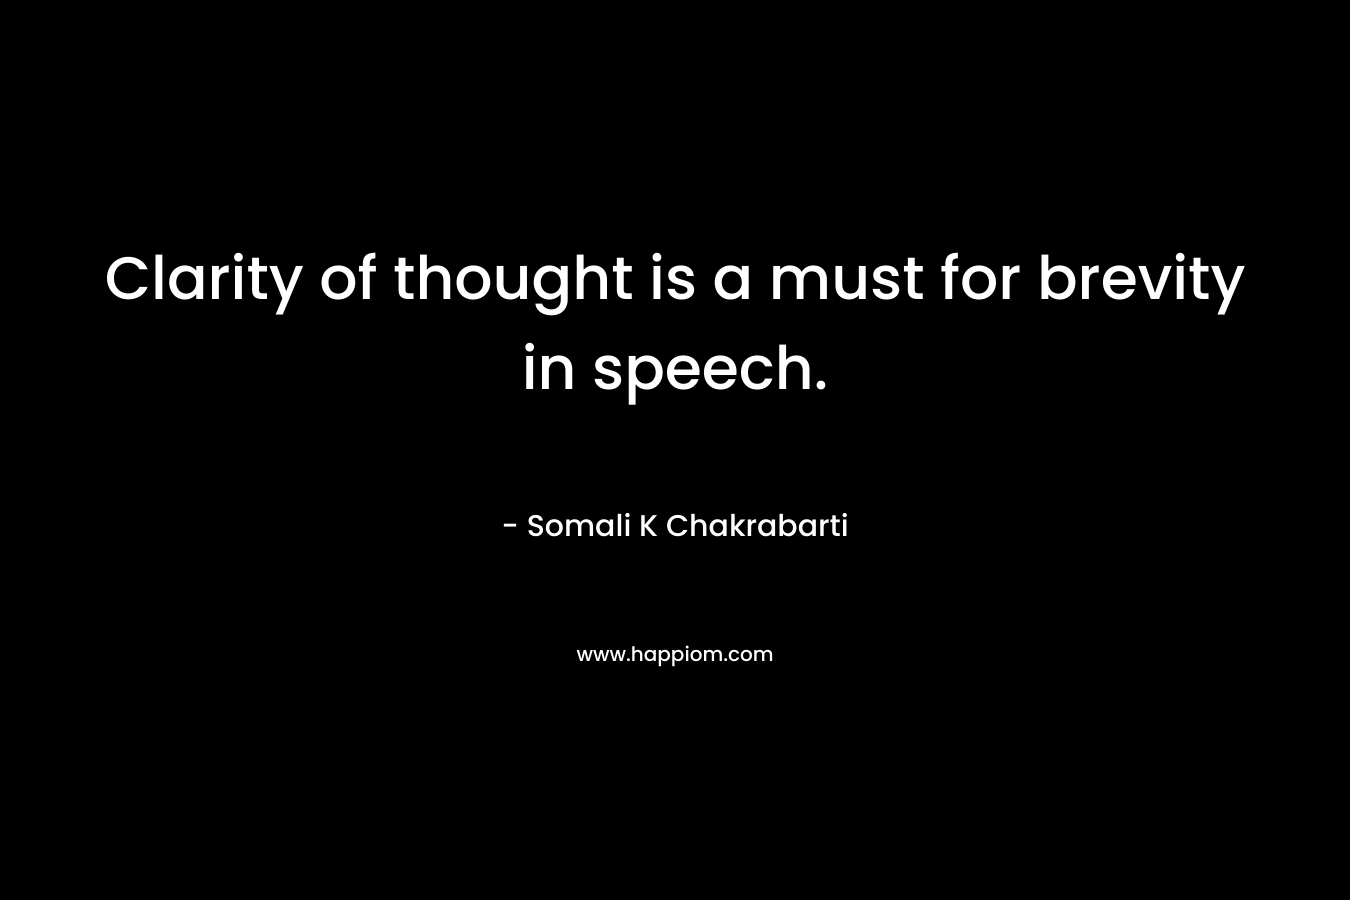 Clarity of thought is a must for brevity in speech.